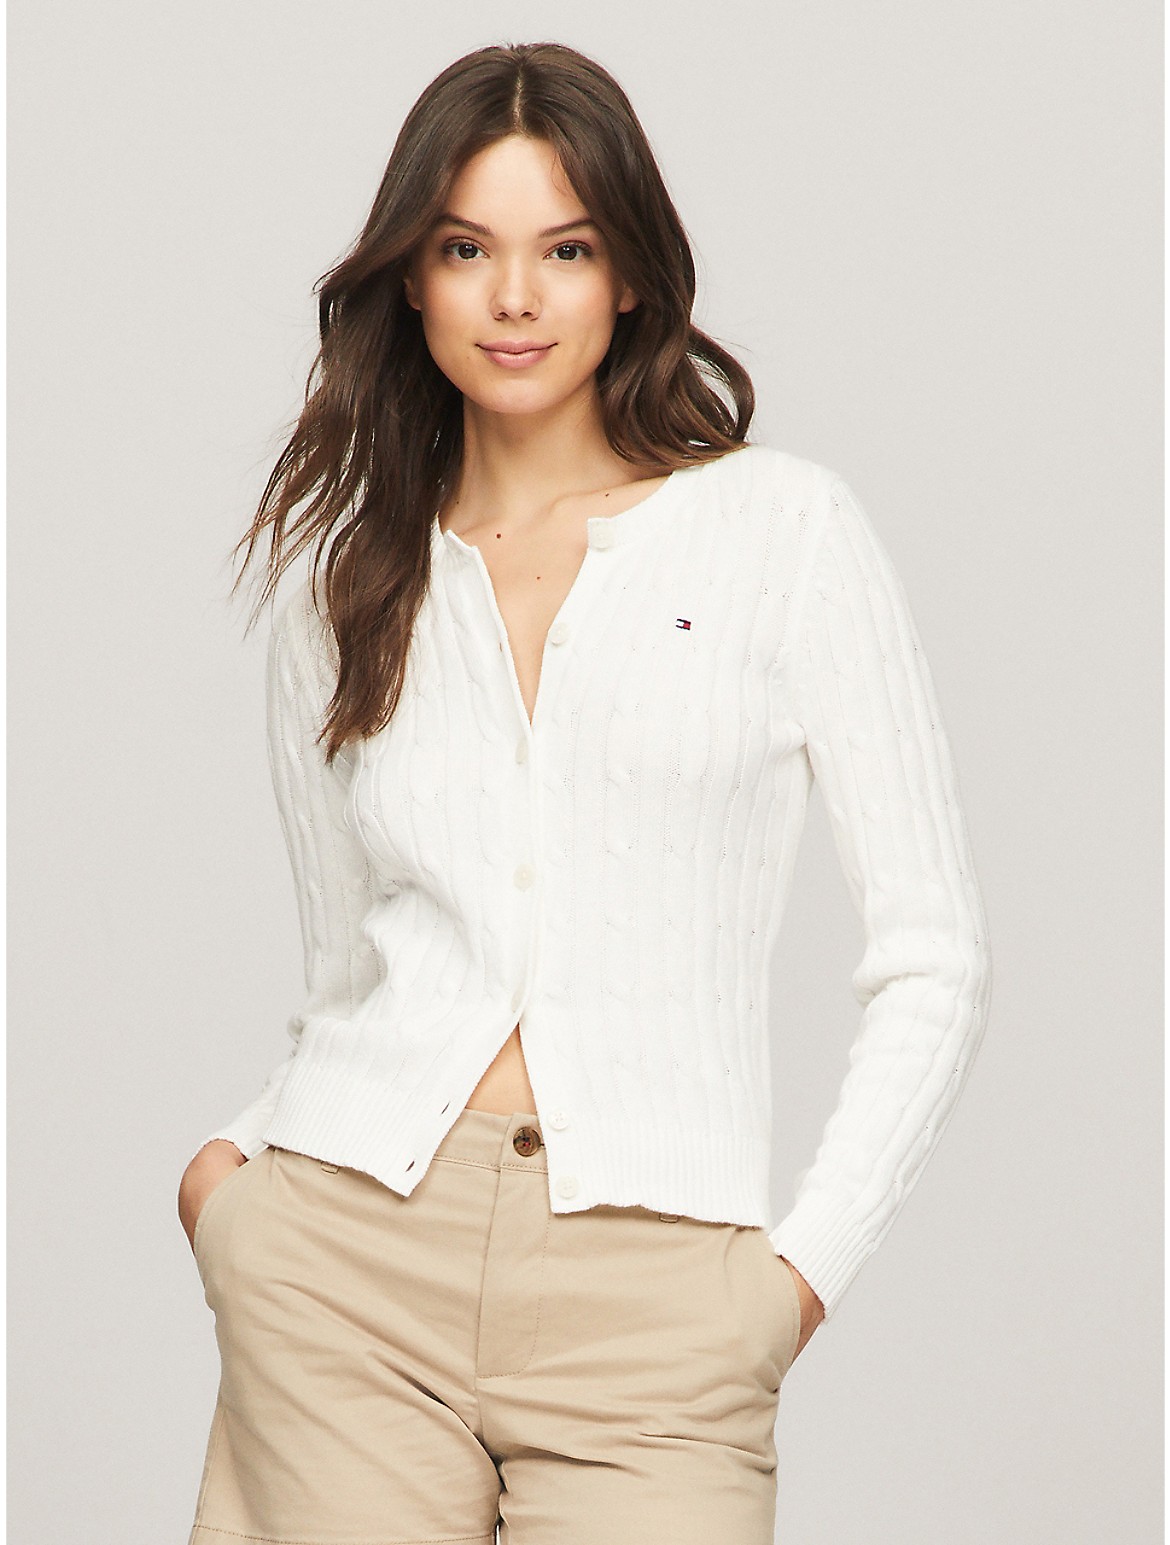 Tommy Hilfiger Women's Long-Sleeve Solid Cable Knit Cardigan - White - XL